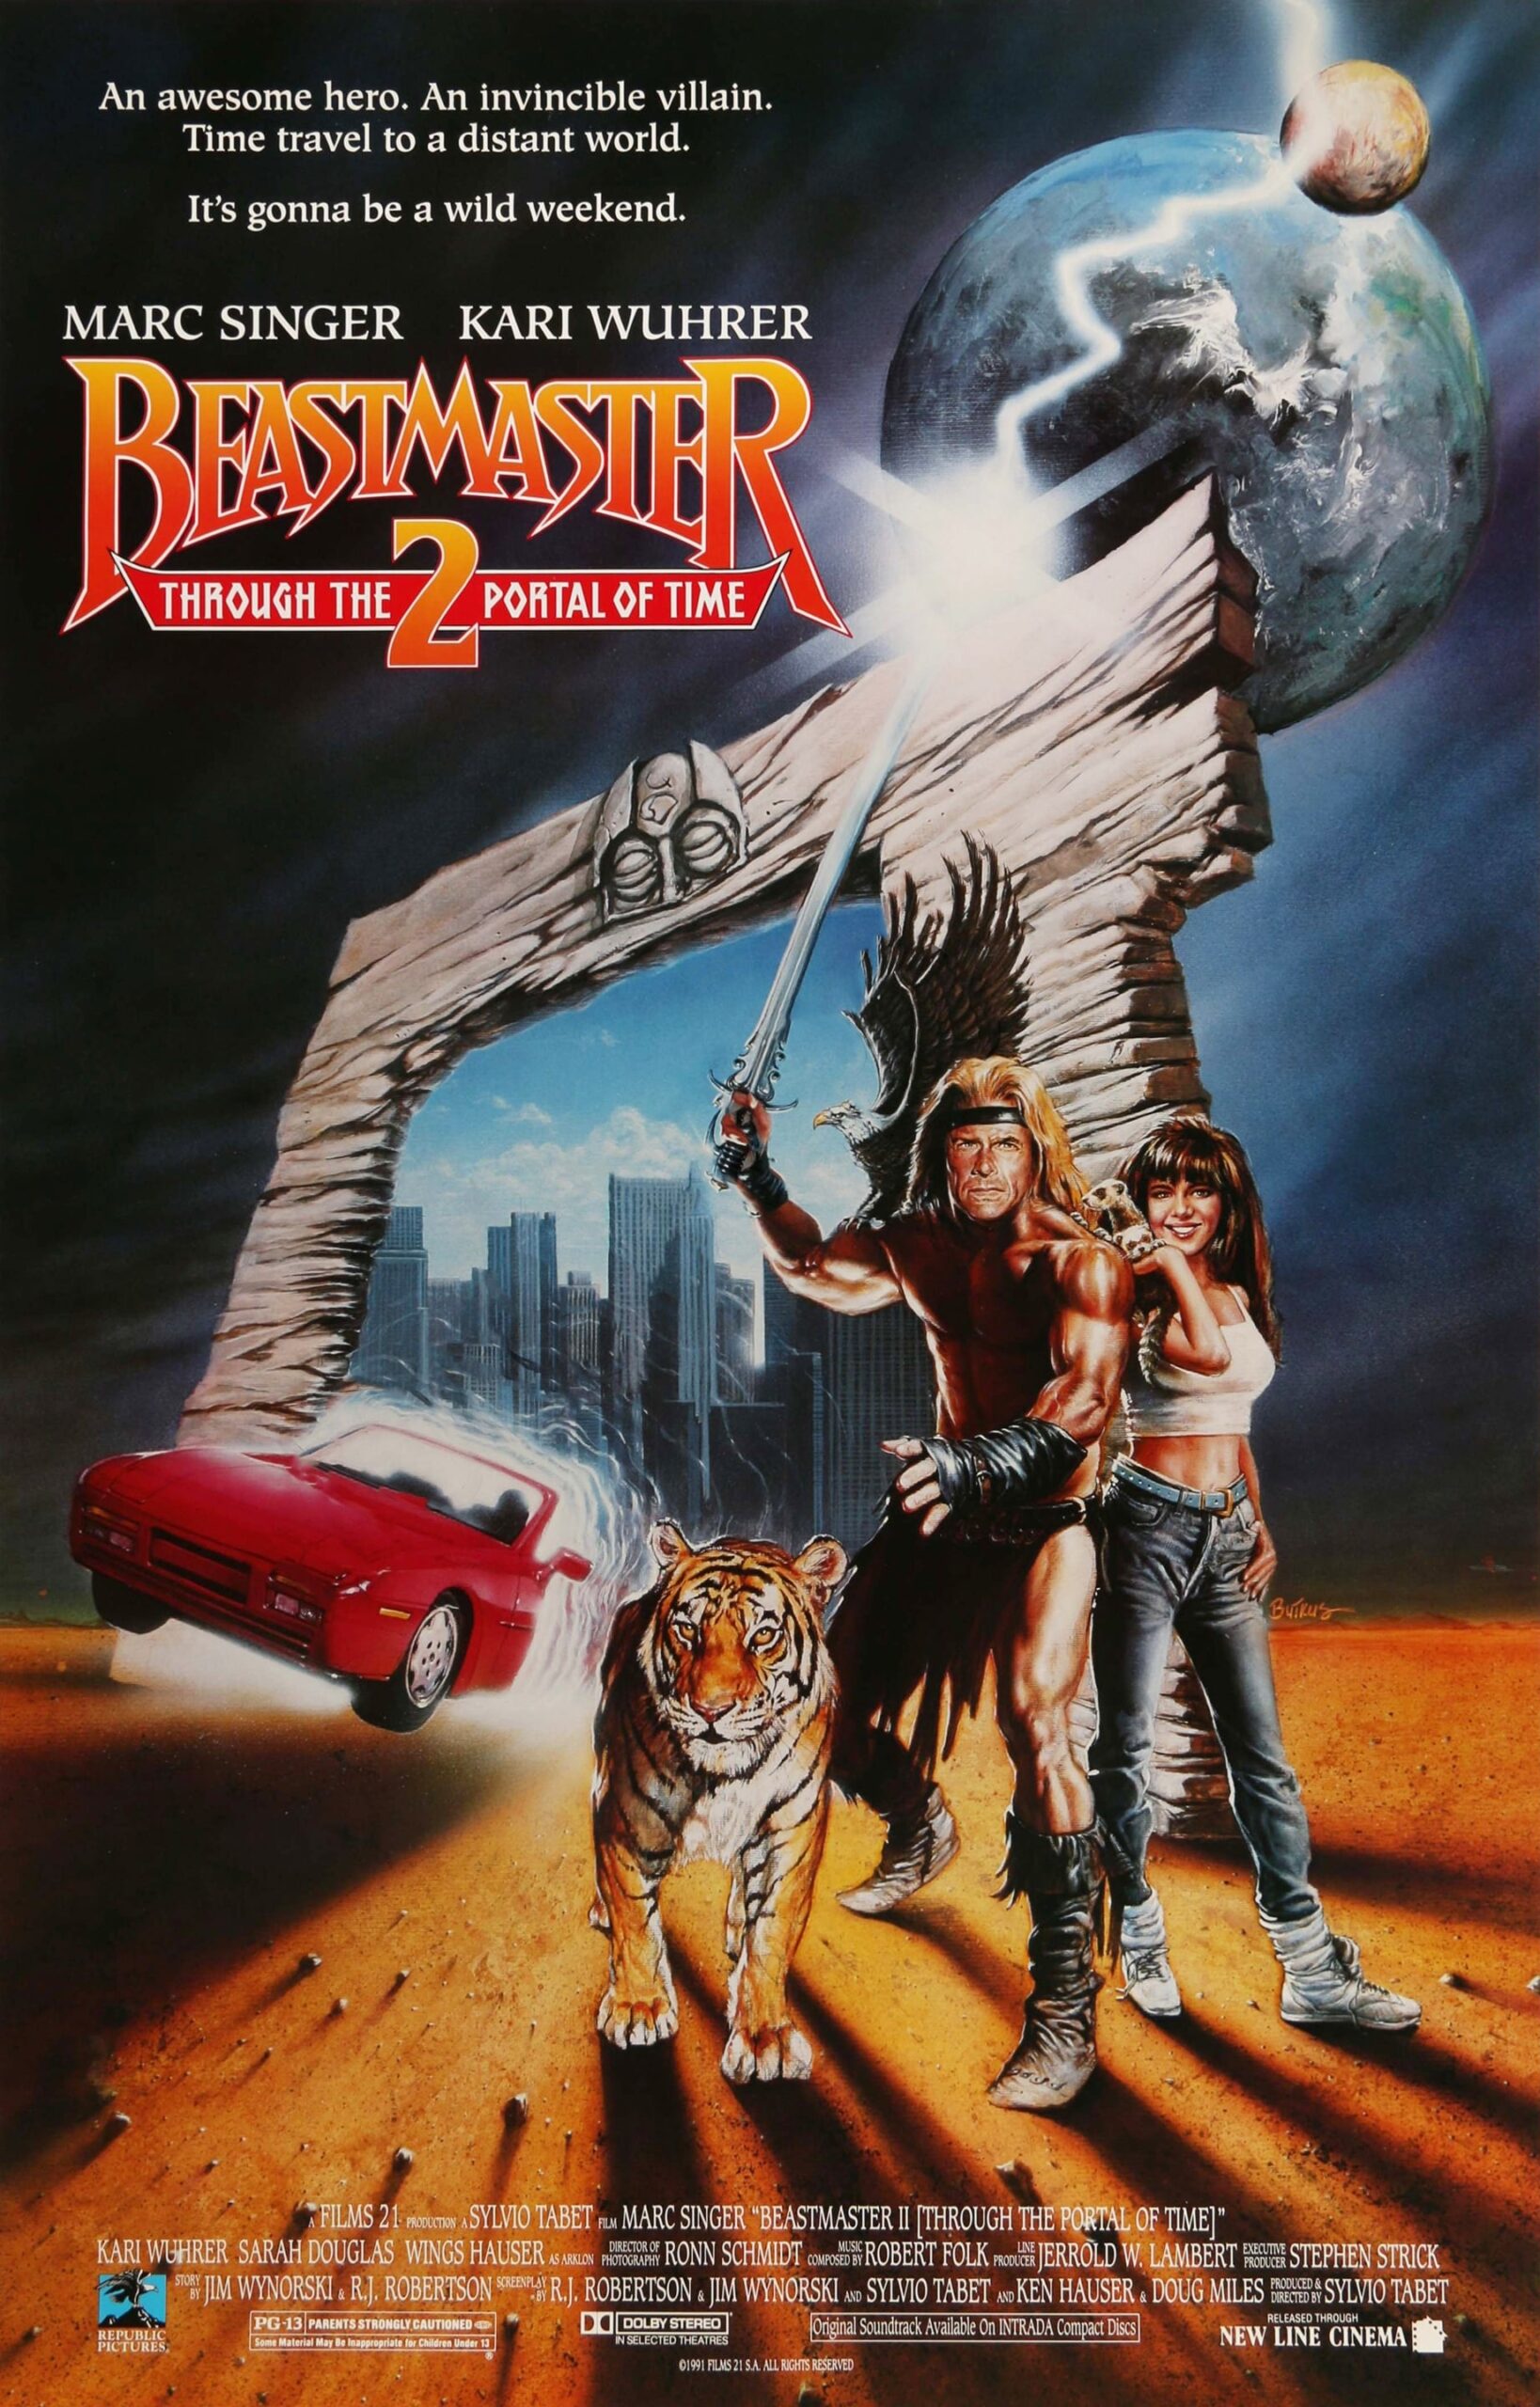 The Beastmaster 2